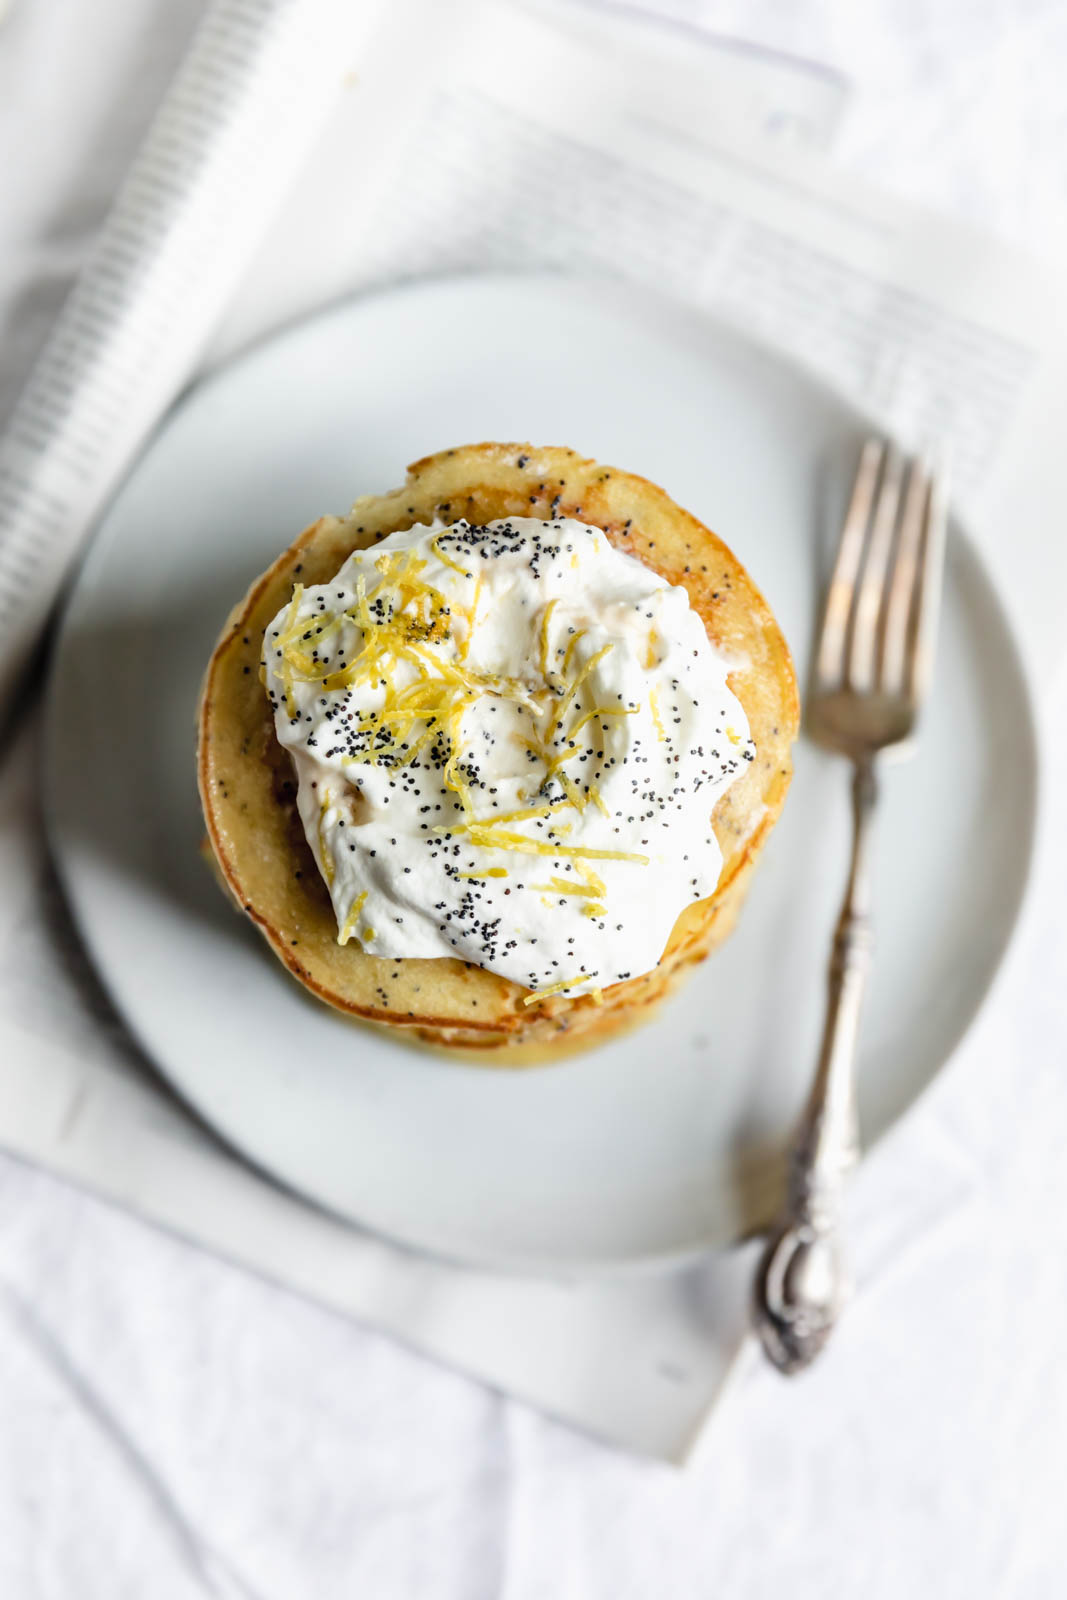 Light and fluffy Gluten Free Lemon Poppy Seed Pancakes made with almond flour and lemon zest. But proceed with caution: you might eat the whole batch!